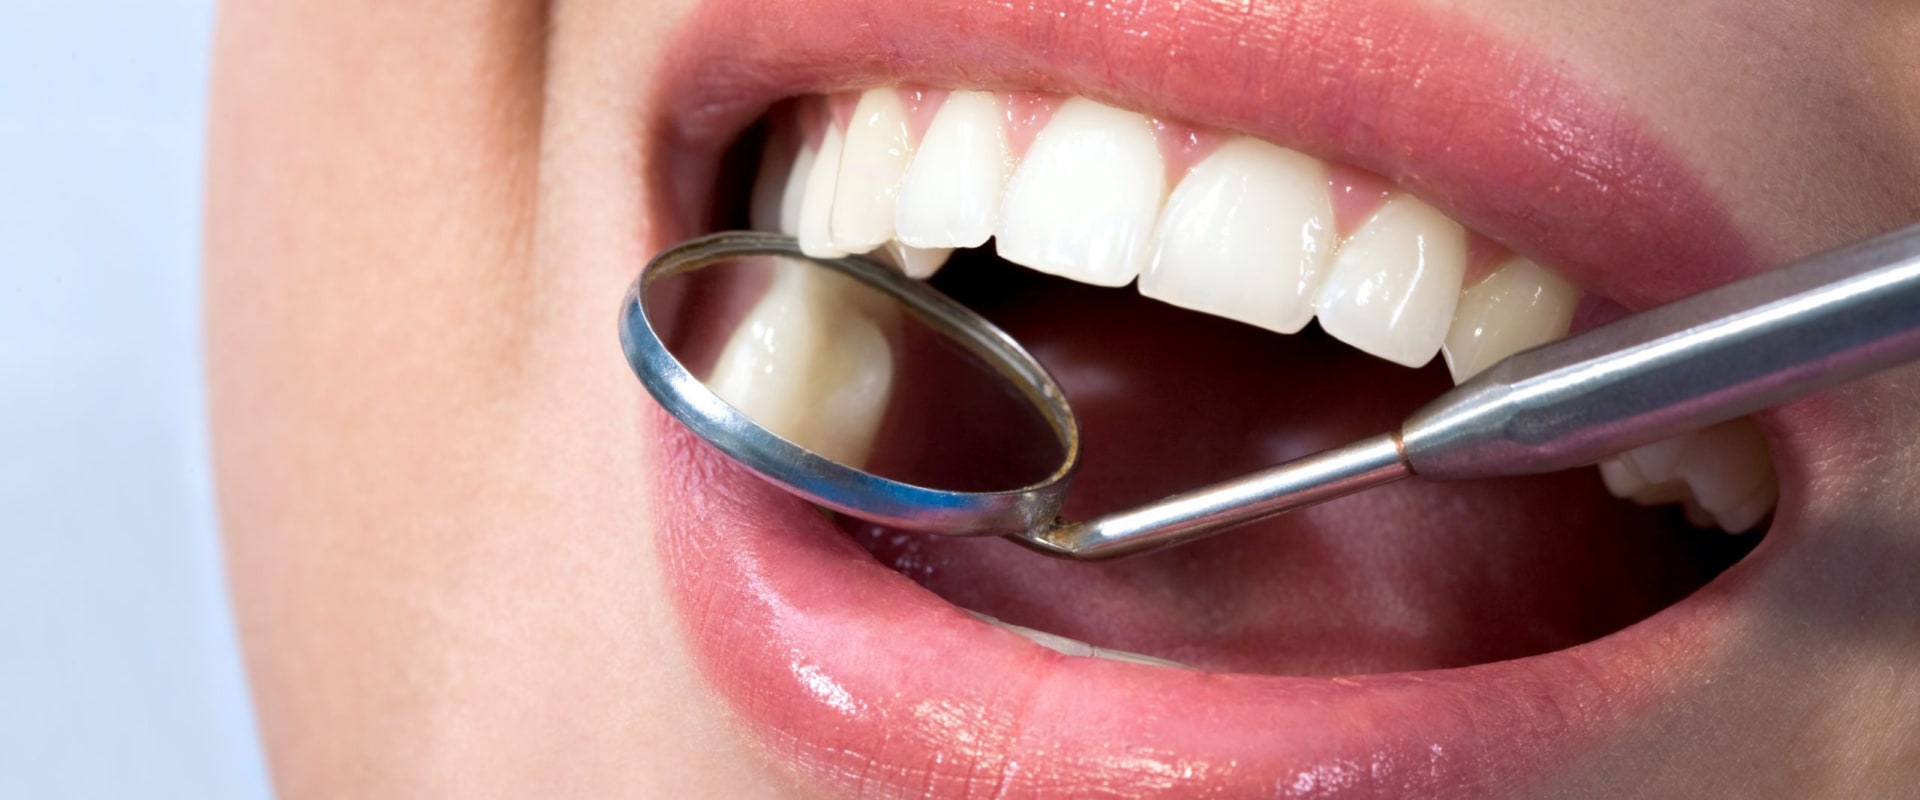 Everything You Need to Know About the Length of Treatment Time for Teeth Straightening